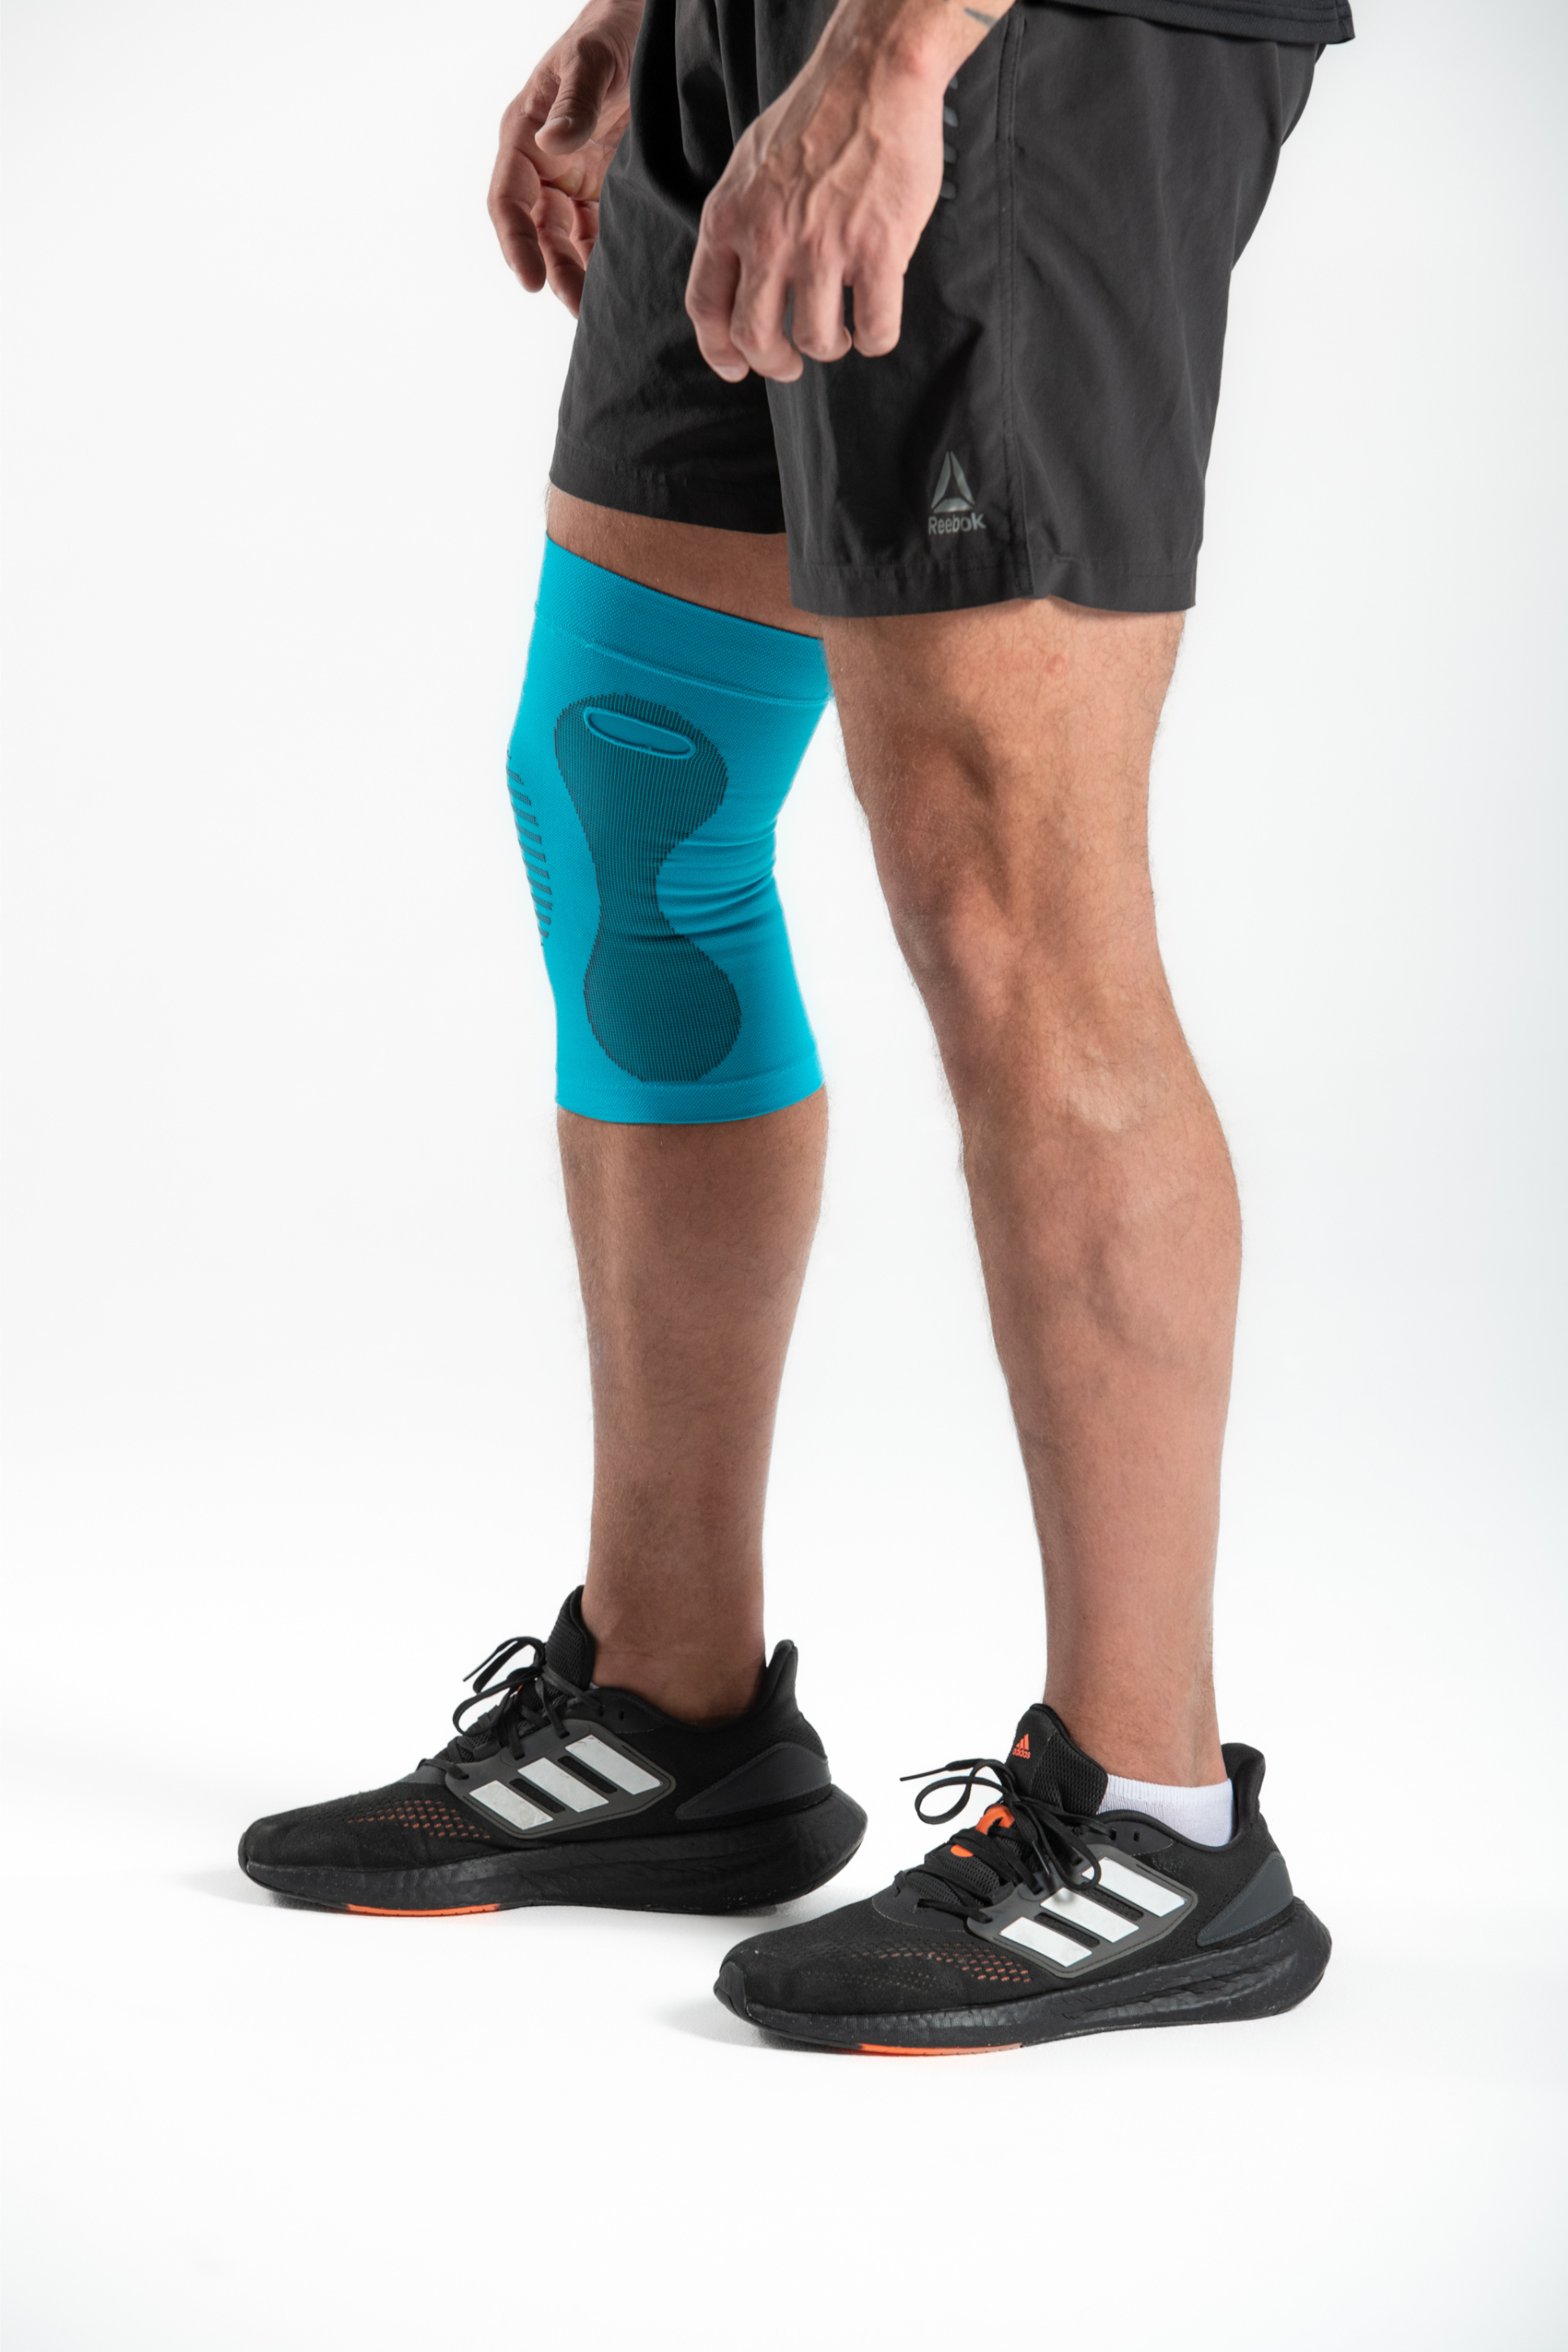 Knee Compression Sleeves with Ice/Heat Packs by Recoverite Compression